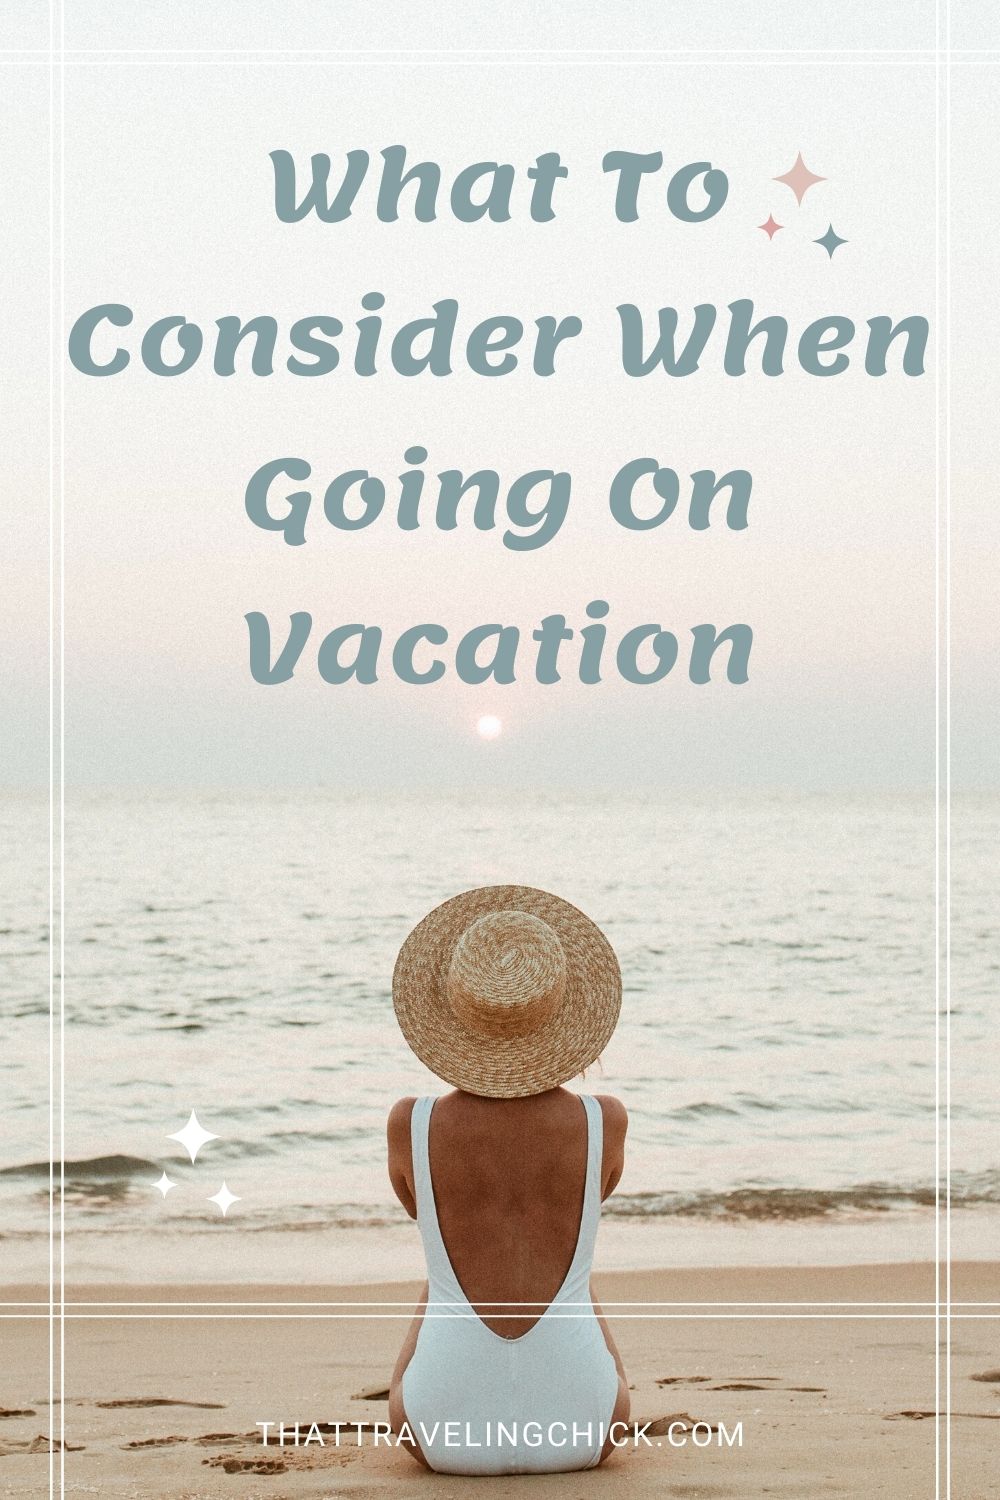 What to Consider When Going on Vacation #vacation